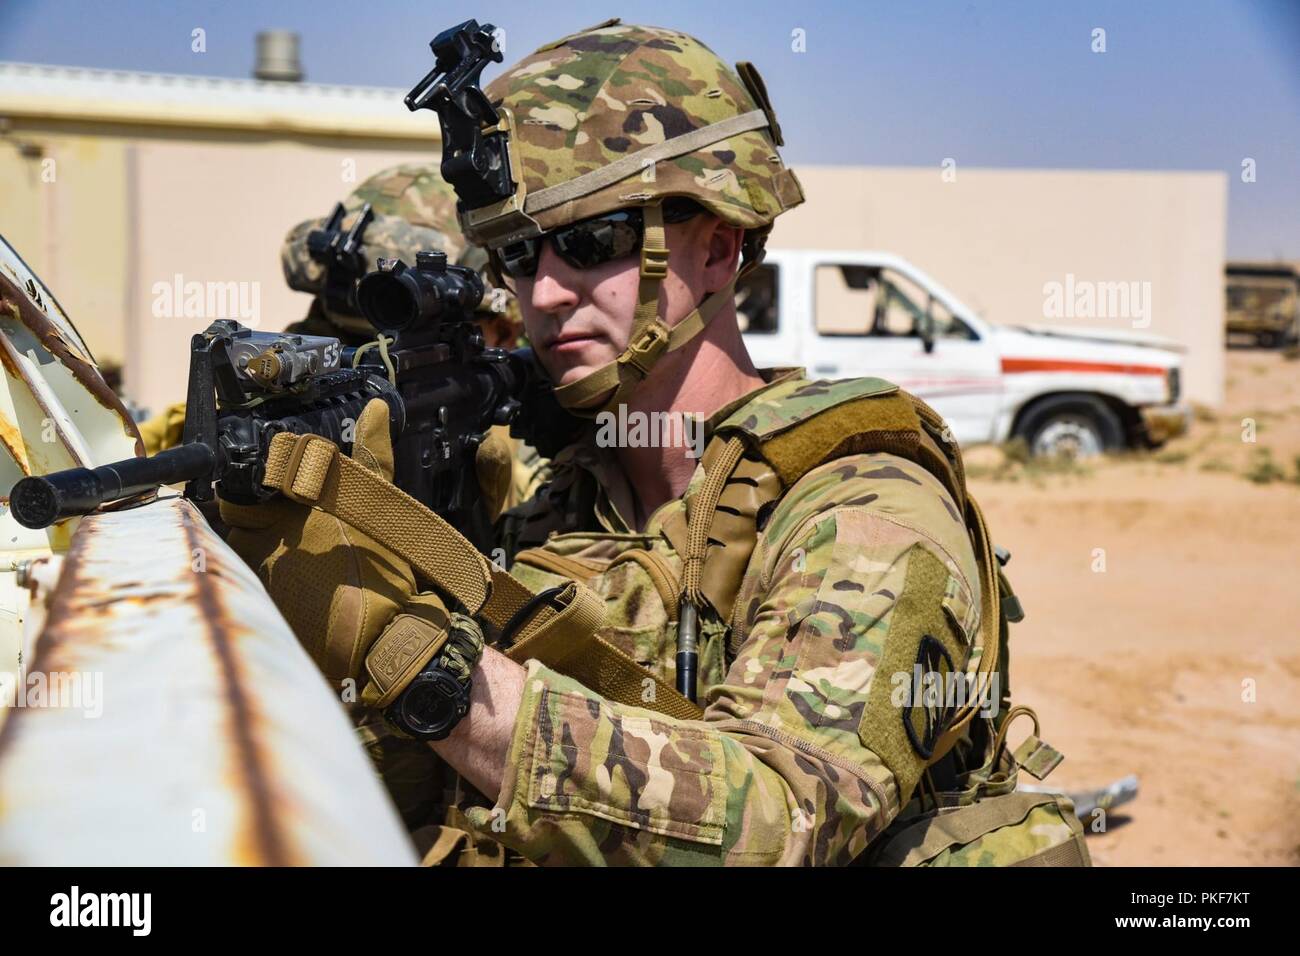 Sgt. Donald Montgomery, an infantryman, with Company C, 2nd Battalion, 137th Infantry Regiment, pulls security while conducting squad situational training exercise rehearsals at the Army Central Command Readiness Training Center, Camp Buehring, Kuwait, on Aug. 8, 2018. The 2-137 IN is deployed to Kuwait in support of Operation Spartan Shield. Stock Photo